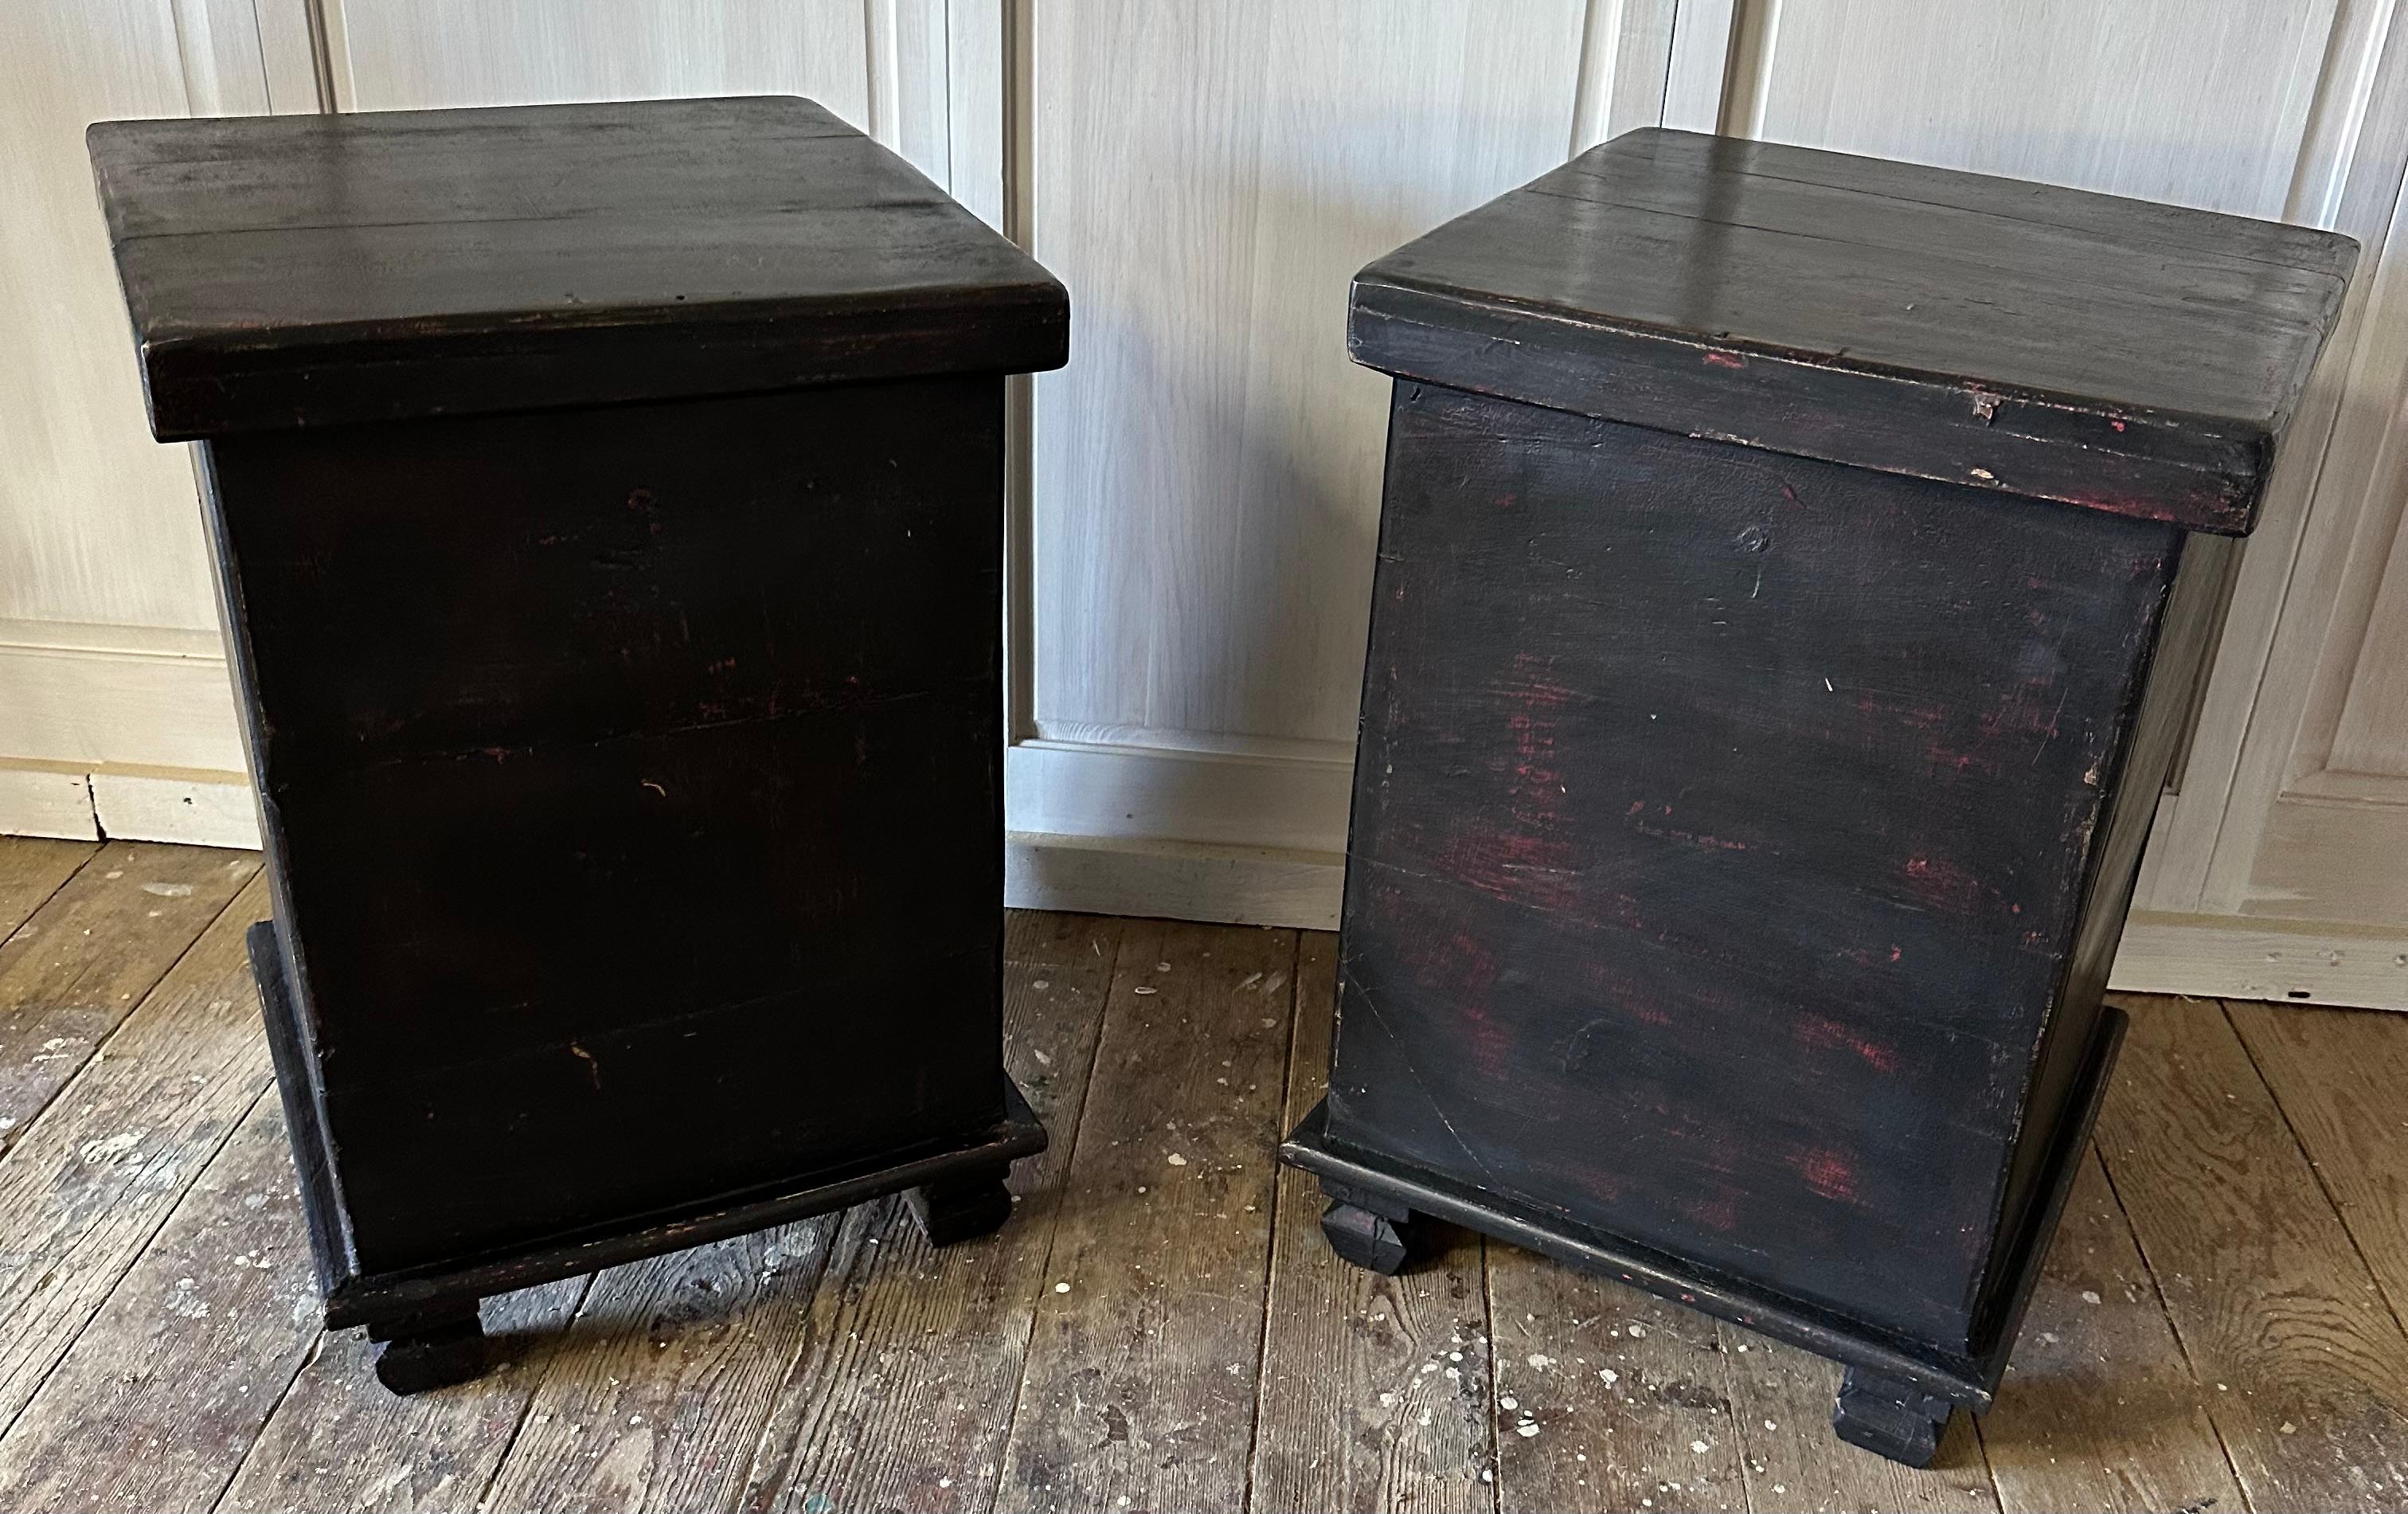 Pair of rustic black painted Chinese lidded blanket chests, great as side table, end table or night stand. The top lifts open fully allowing full use of interior storage. A protruding extension at the center back holds the lid up when open.
Search